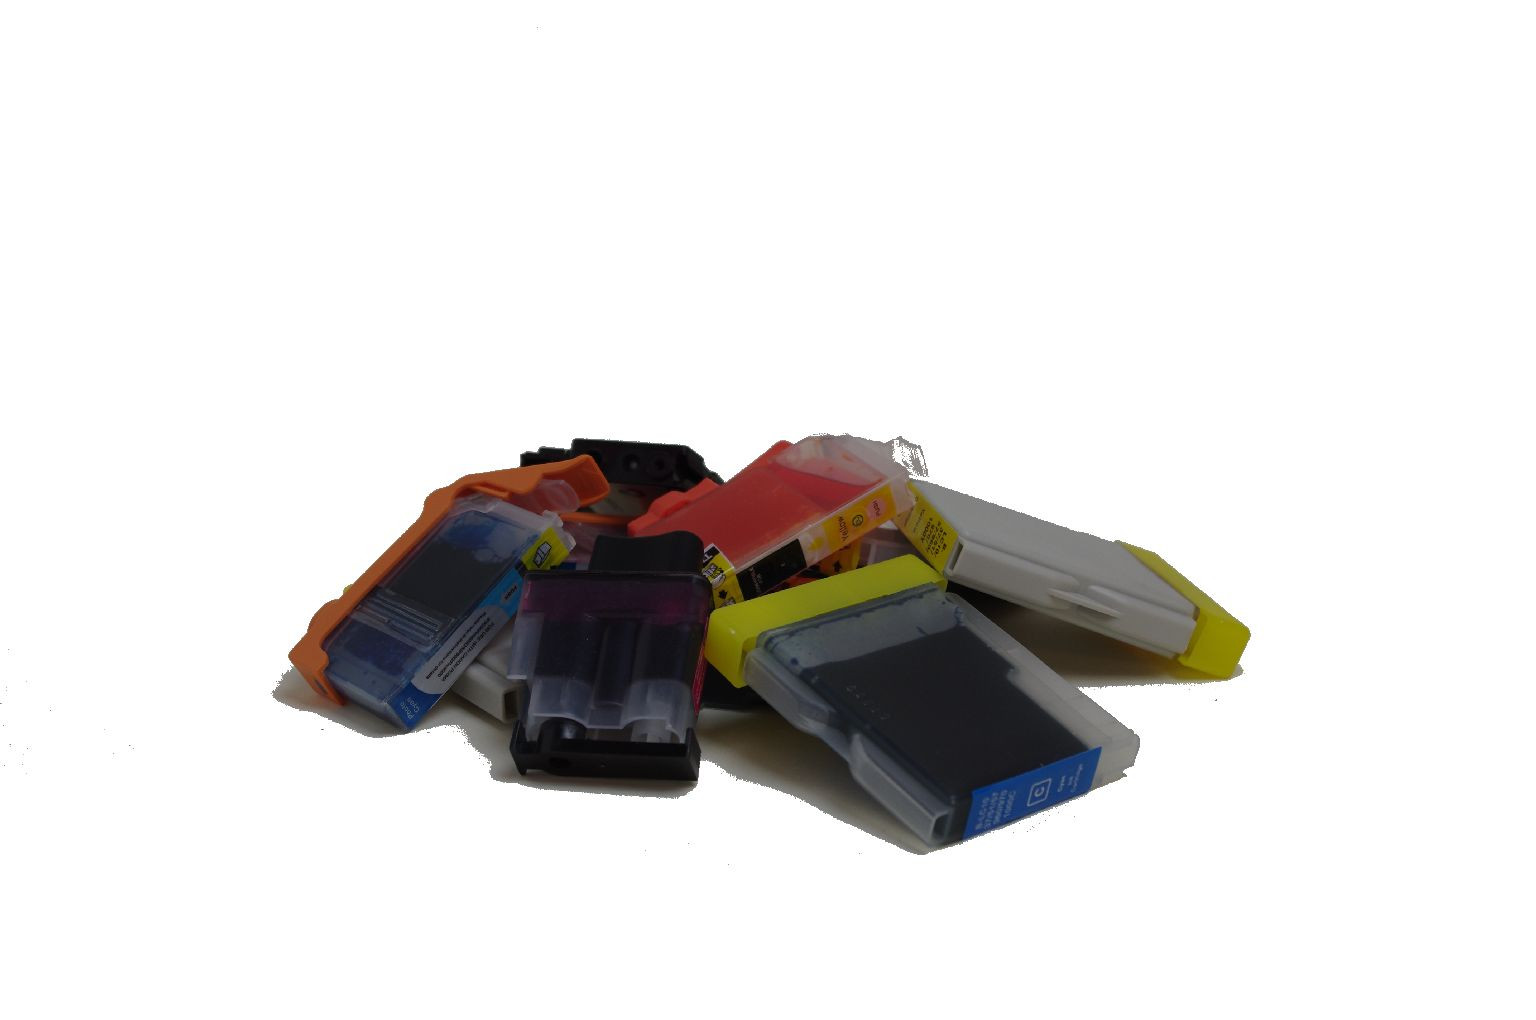 Set consisting of Ink cartridge (alternative) compatible with HP CH565A black, C4911A/C 4911 A - 82 - Designjet 500 cyan, C4912A/C 4912 A - 82 - Designjet 500 magenta, C4913A/C 4913 A - 82 - Designjet 10 PS yellow - Save 6%